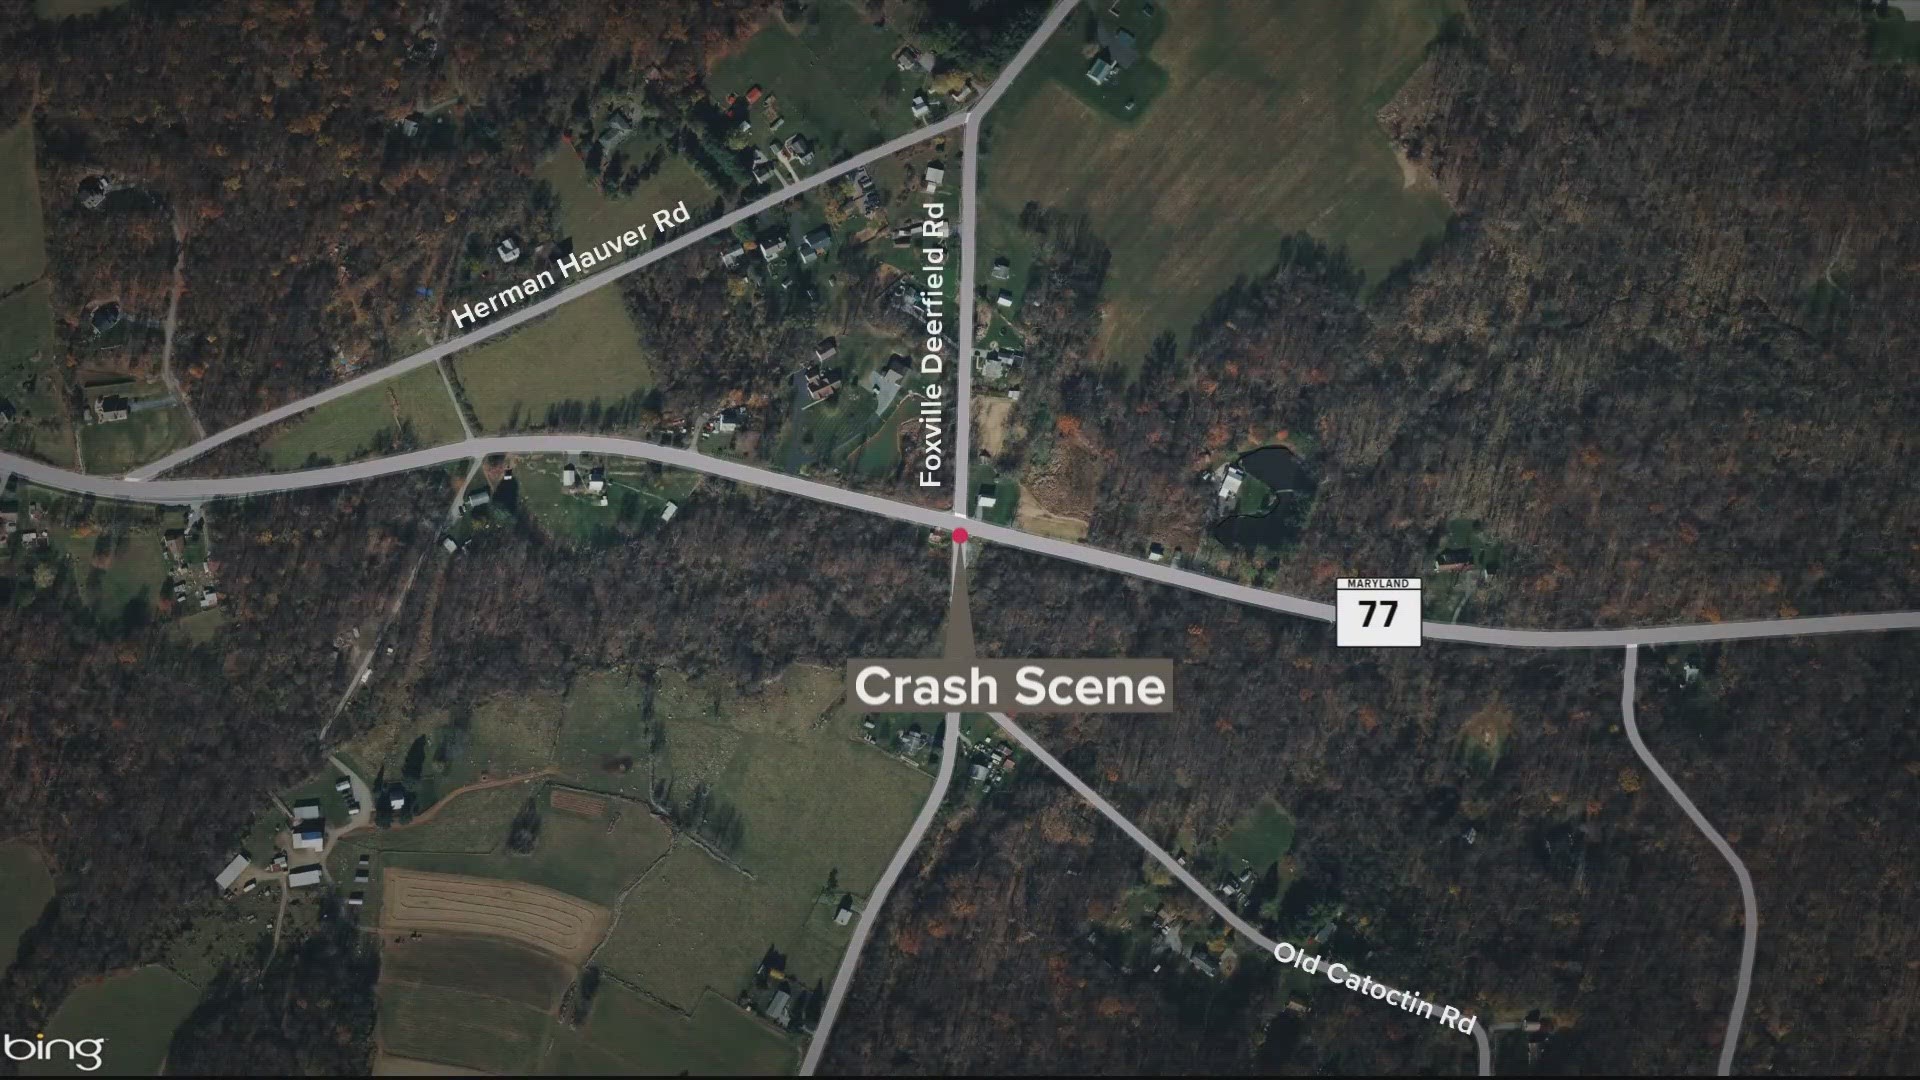 Officials say the crash happened on Foxville Road near Stottlemeyer Road around 10:20 a.m. on Sunday.